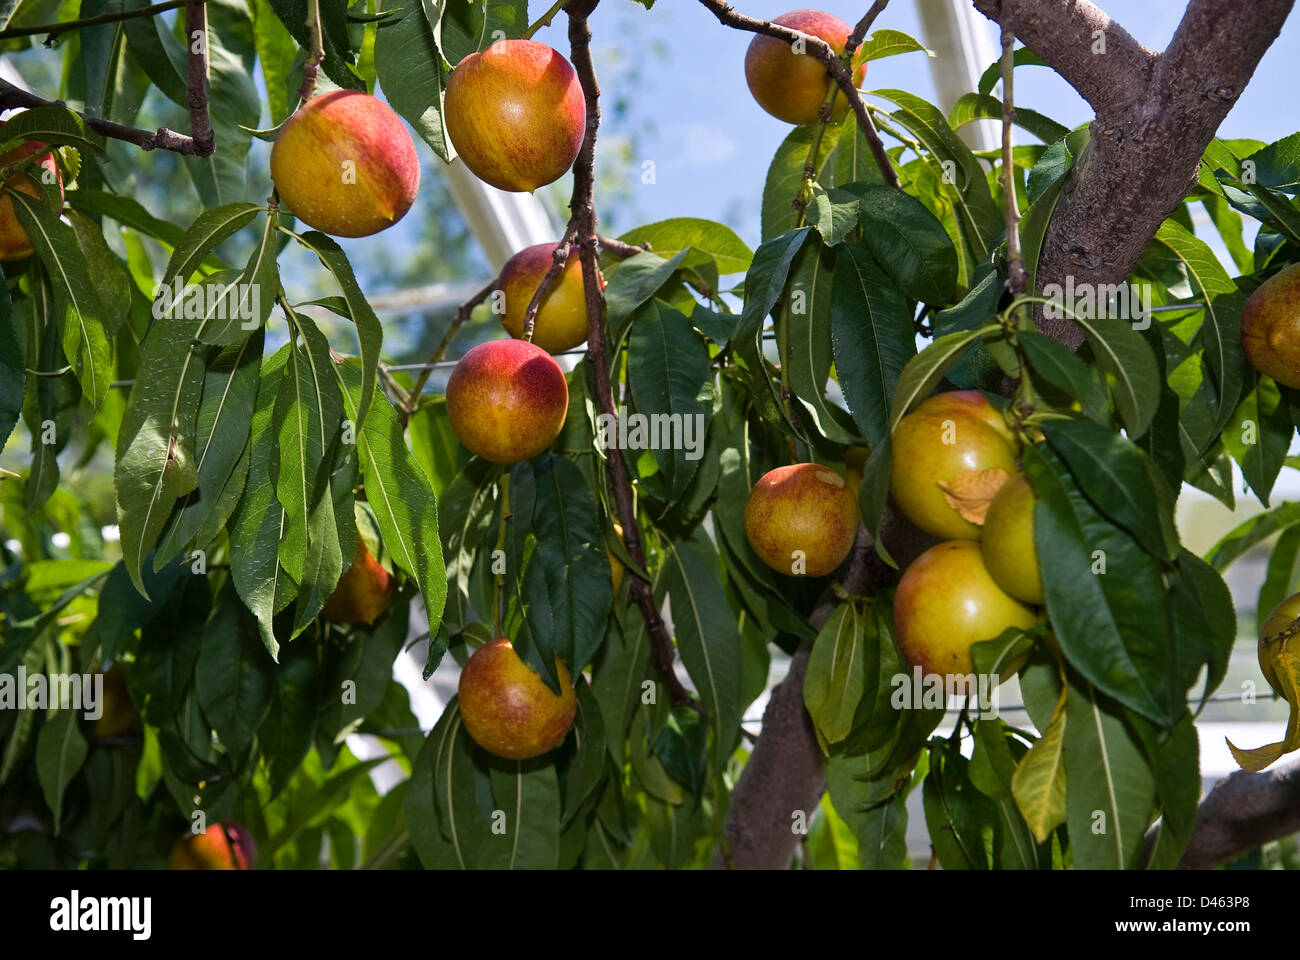 Nectarines growing in a greenhouse at West Dean Gardens near Chichester, West Sussex, UK Stock Photo